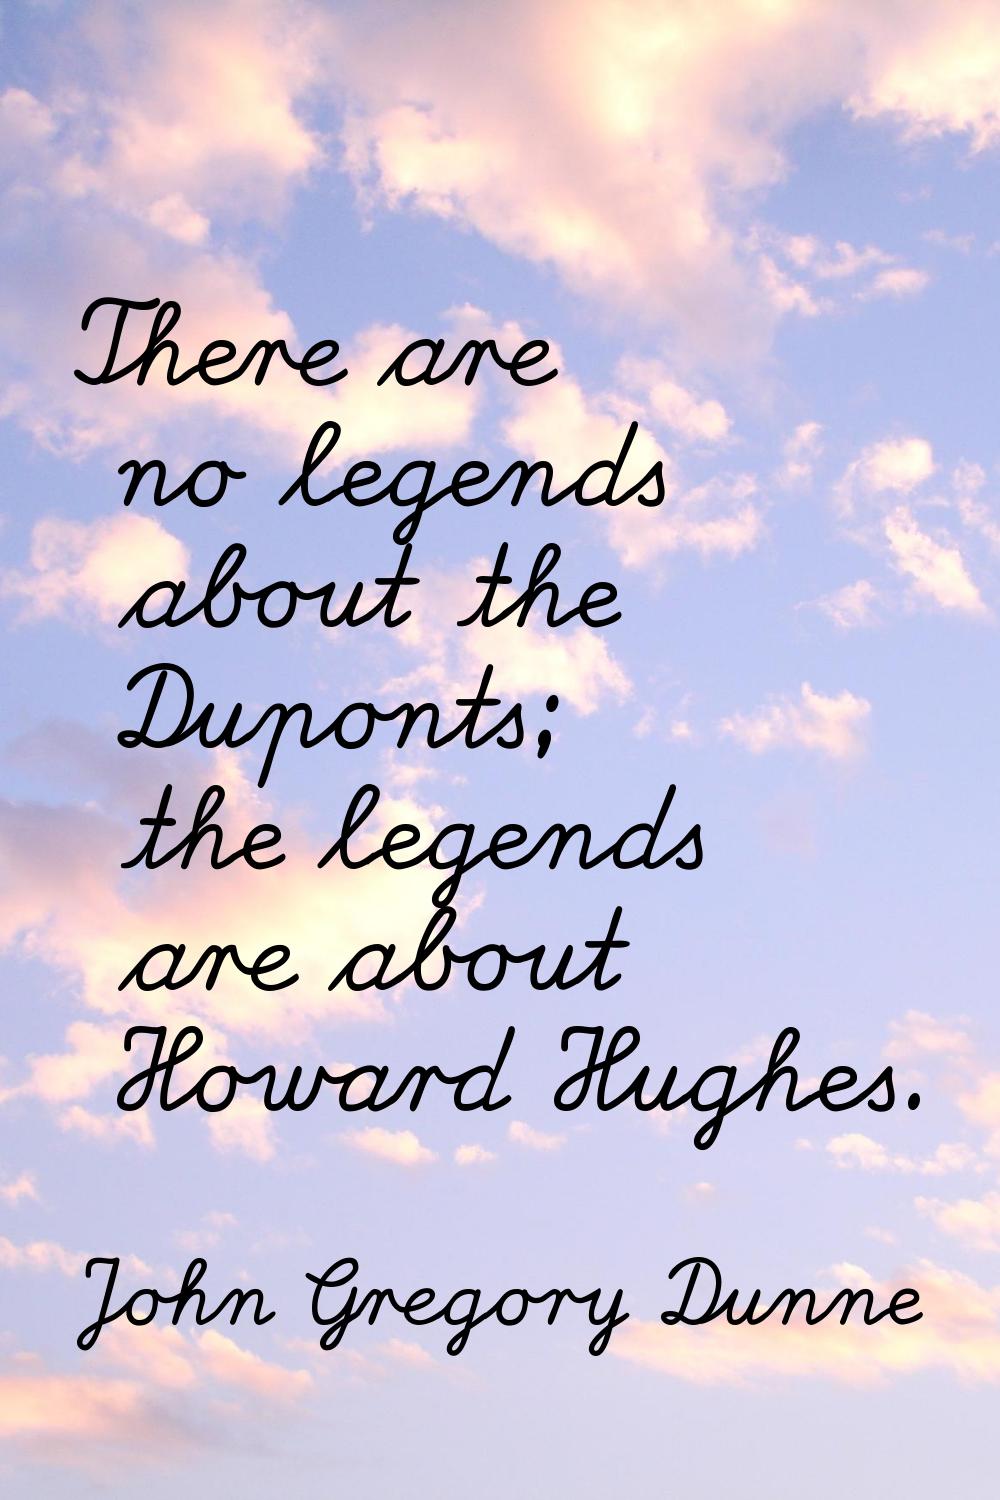 There are no legends about the Duponts; the legends are about Howard Hughes.